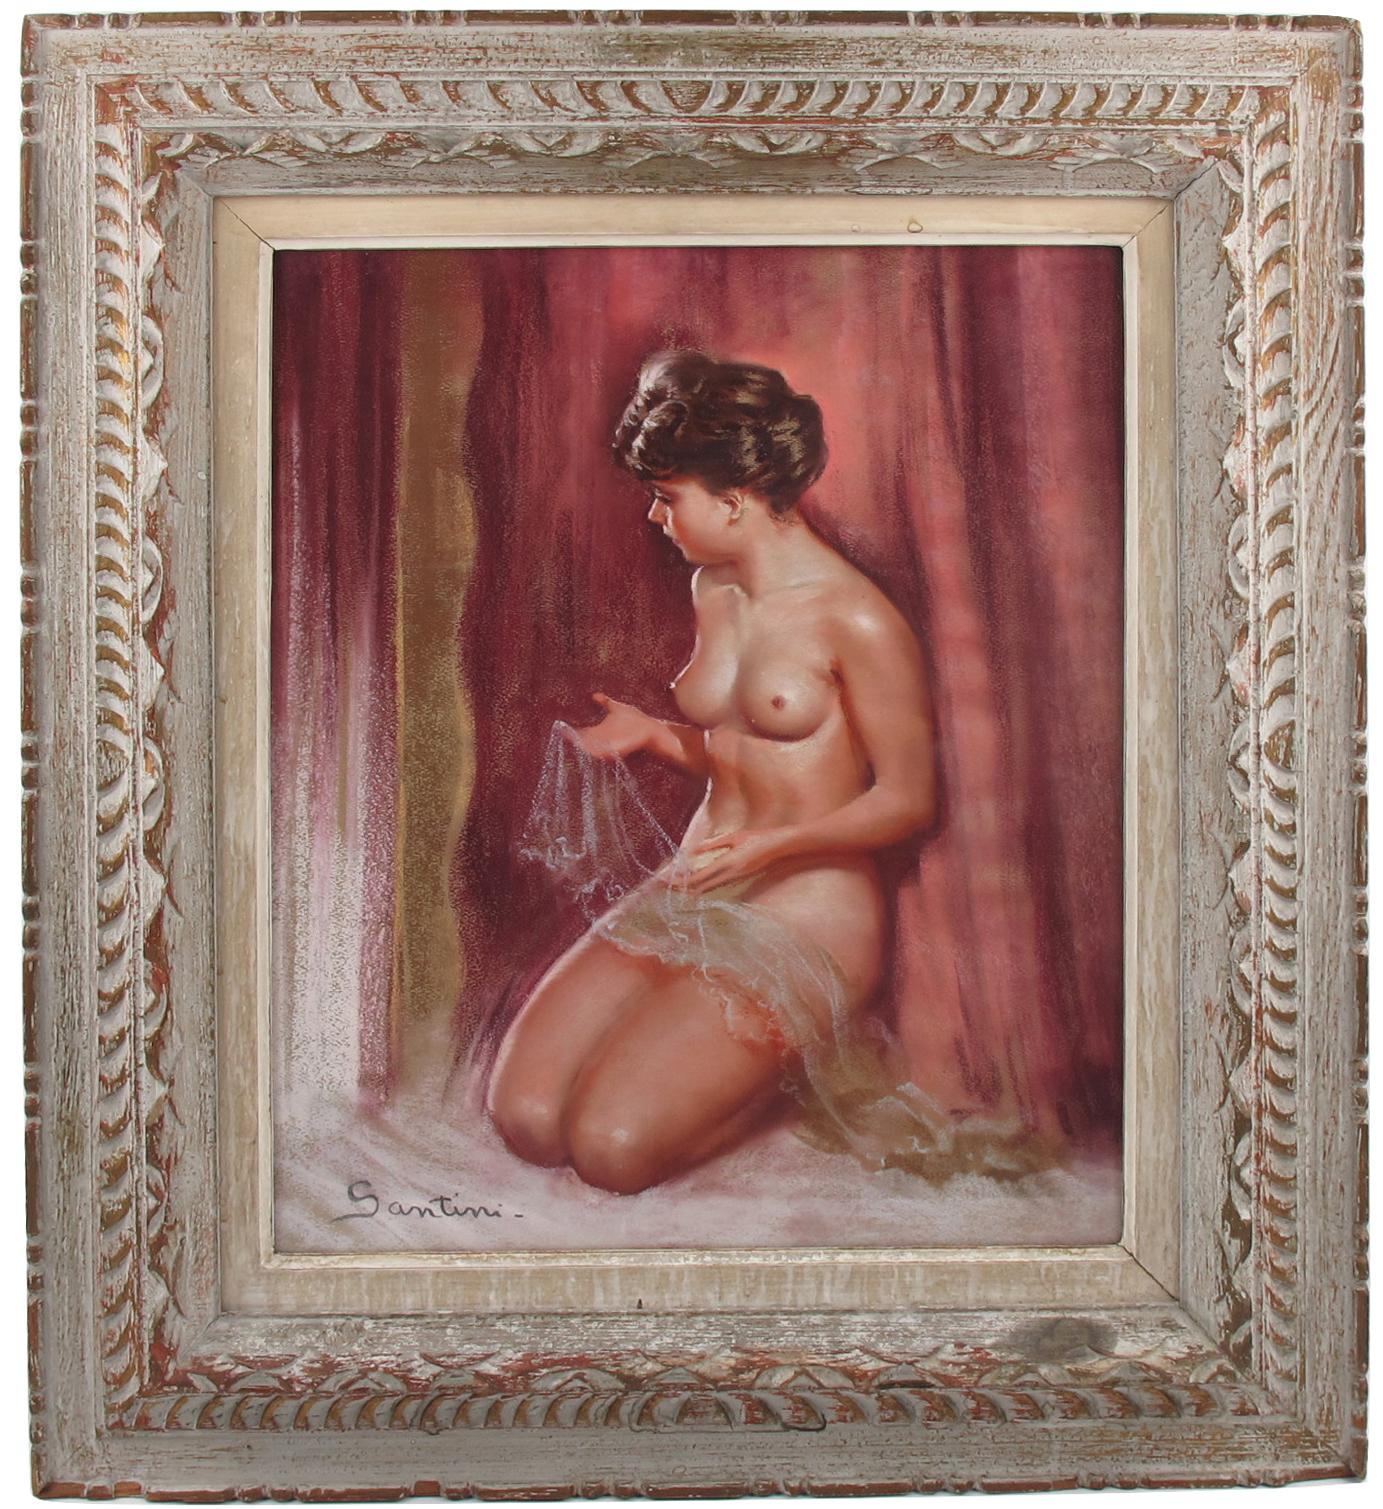 This charming pastel painting on paper was designed by Pio Santini (1908-1986) and named: nude with lace. The artist's signature, Santini, can be found in the bottom left corner of the artwork.
Lovely romantic composition with a nude young lady